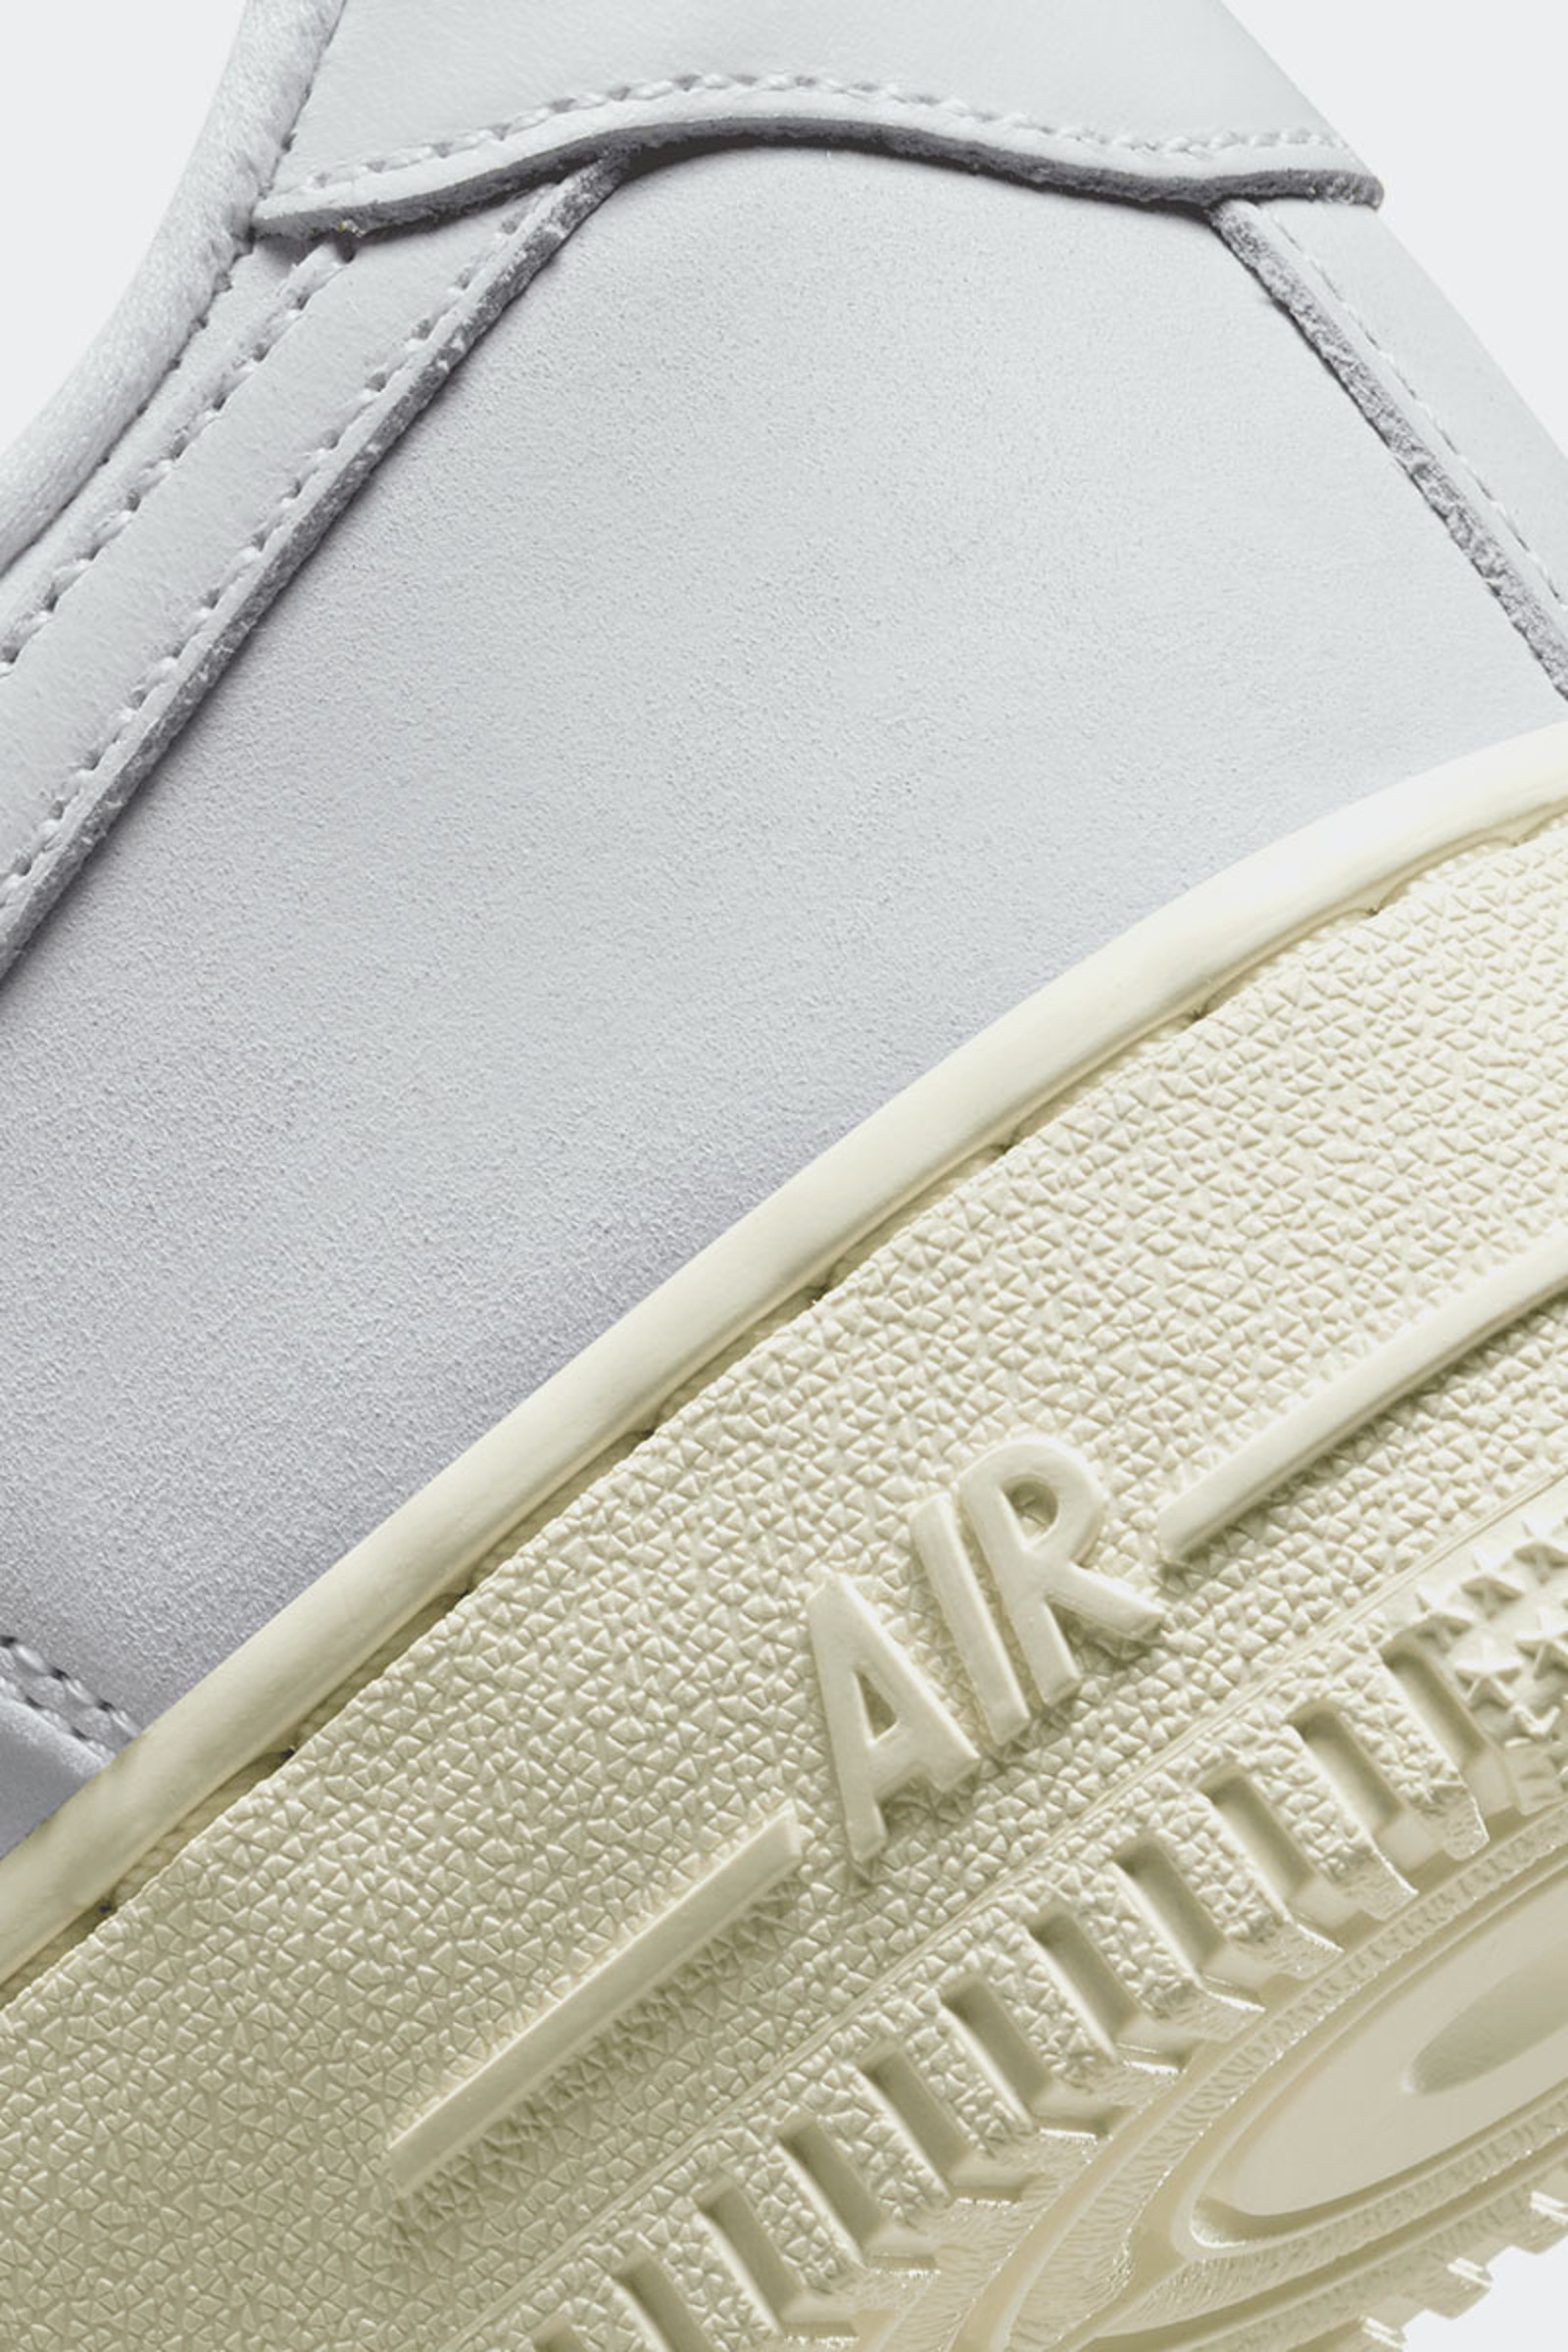 Nike Air Force 1 07 Lv8 Sneakers White / Sail / Platinum Tint for